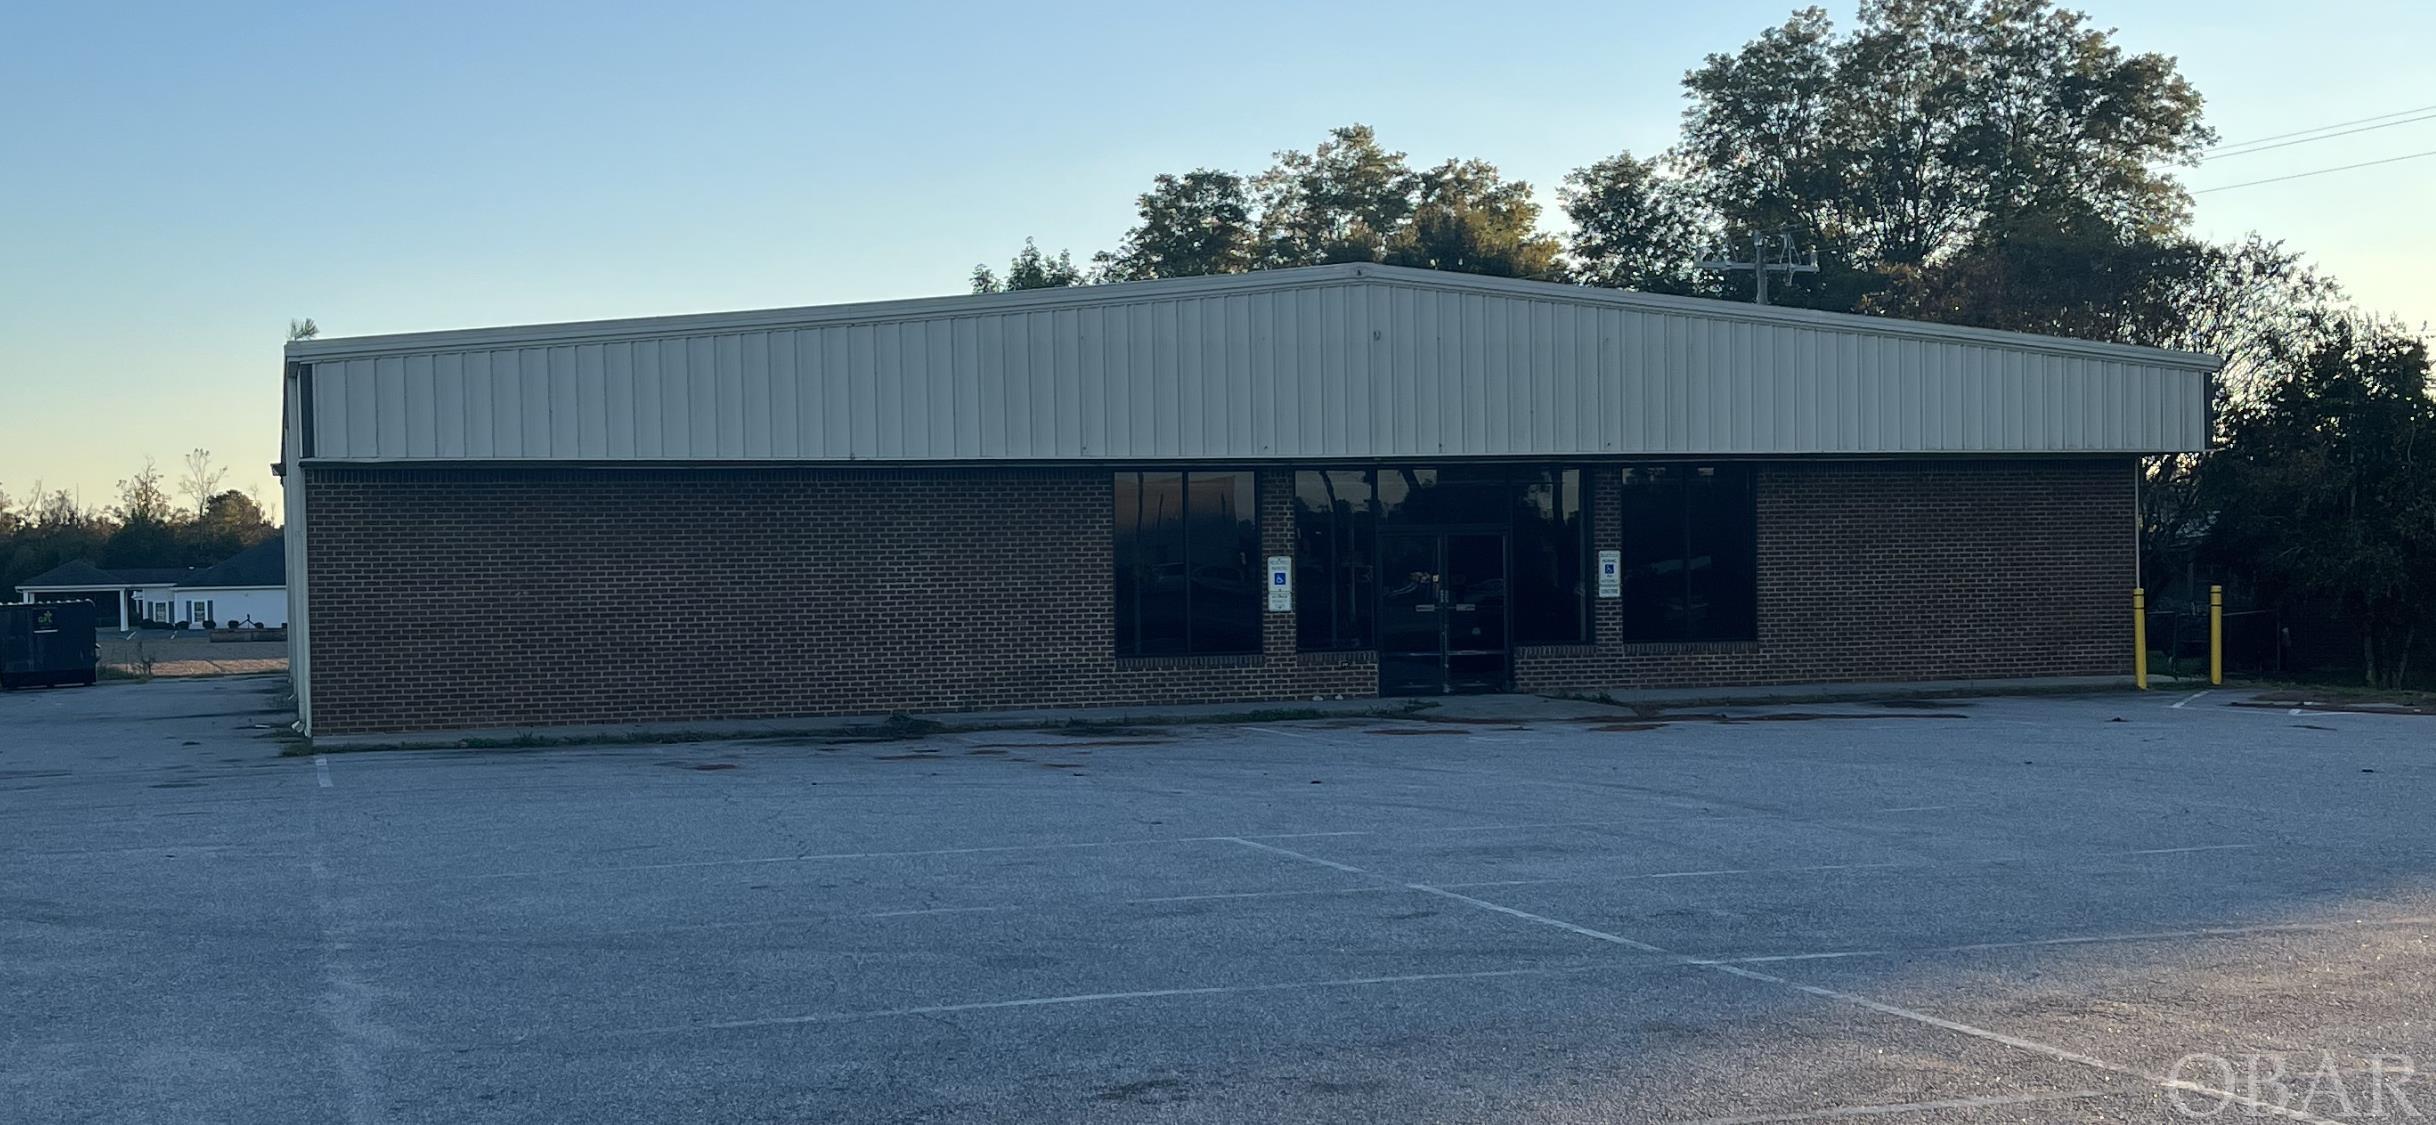 This commercial building was  originally a dollar store and has great potential.  7,208 square feet of retail showroom that could be a thrift store, church, grocery store, bingo hall, flea market, fitted for offices, warehouse, or a variety of other uses.  With 792 Square feet of storage the total footage is 8,000.  The asking price of $299,000 divided by 8,000 sq. ft. is only $37.37/sq. ft., well below today's construction costs.  The current tax value is $531,652. The asking price is 43.7% less than the tax value.